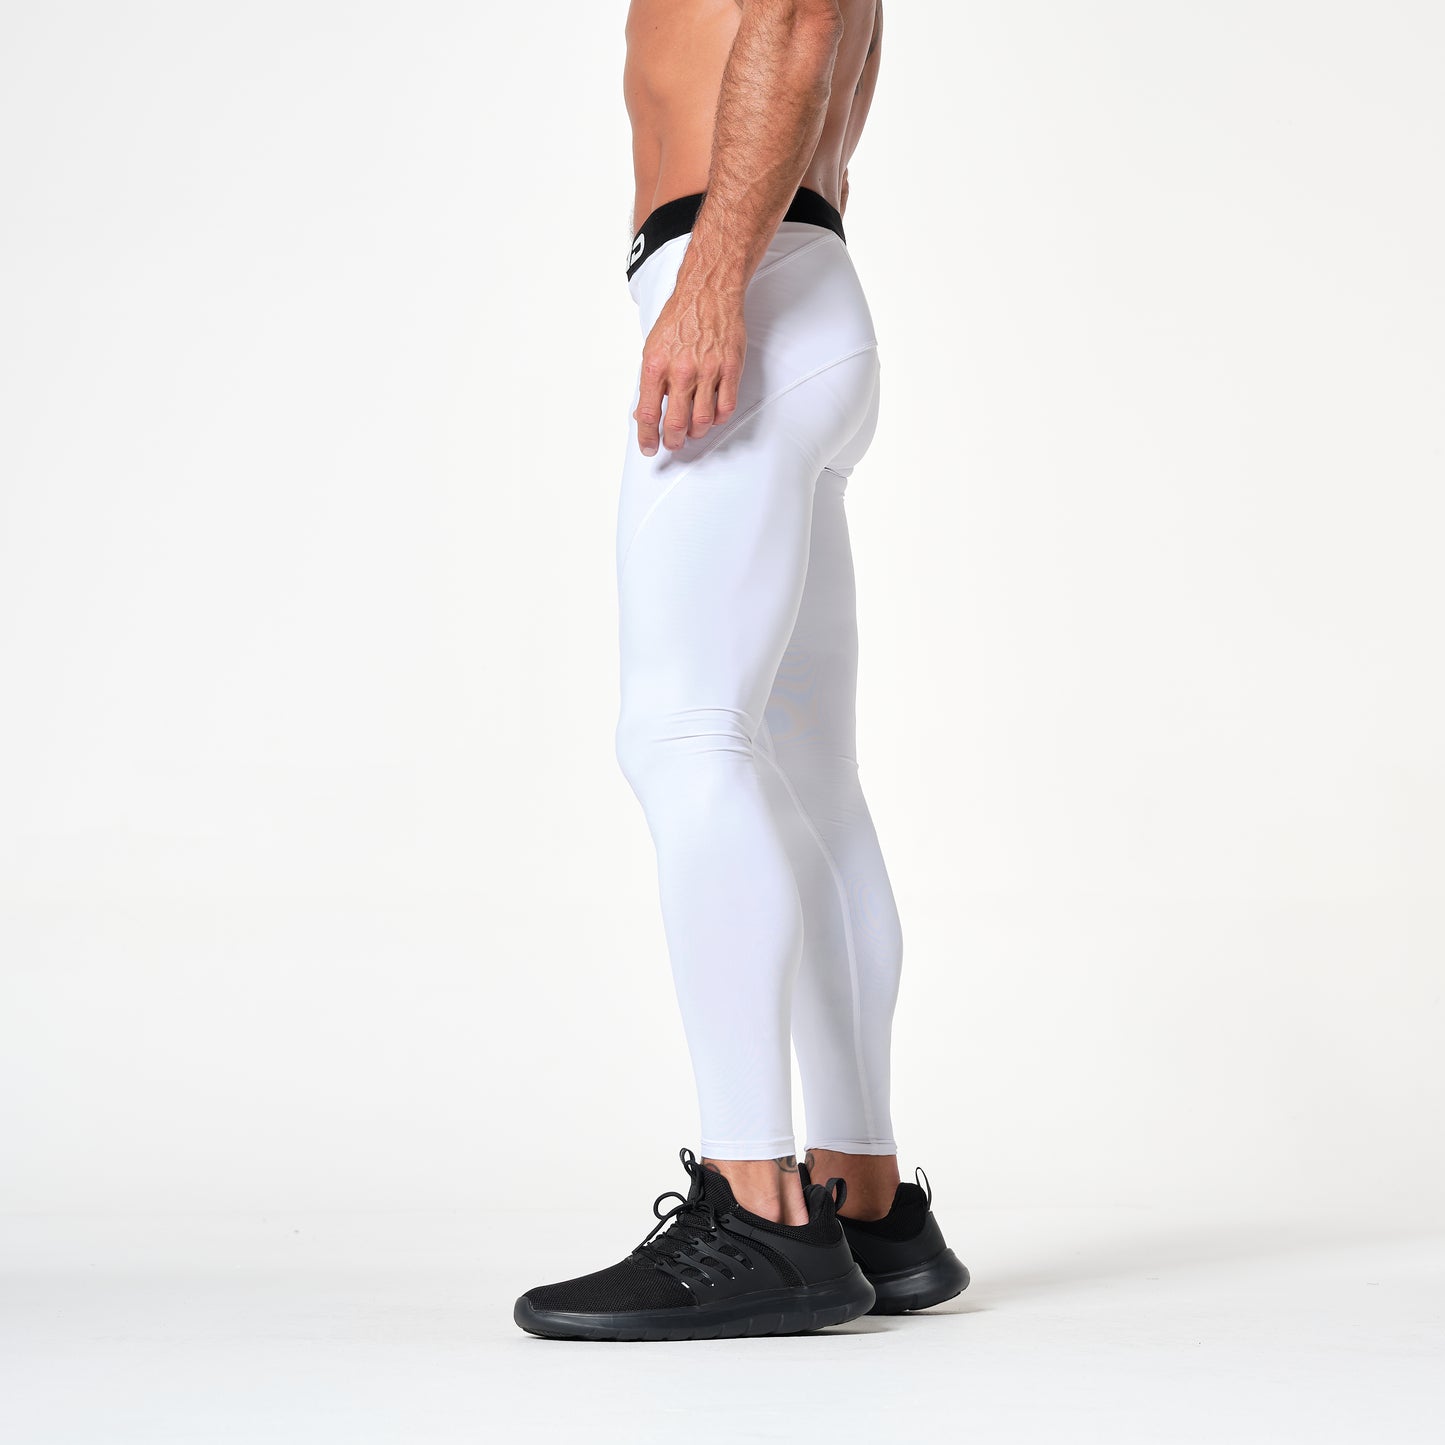 Buy Lavento Men's Compression Pants Running Tights Leggings with